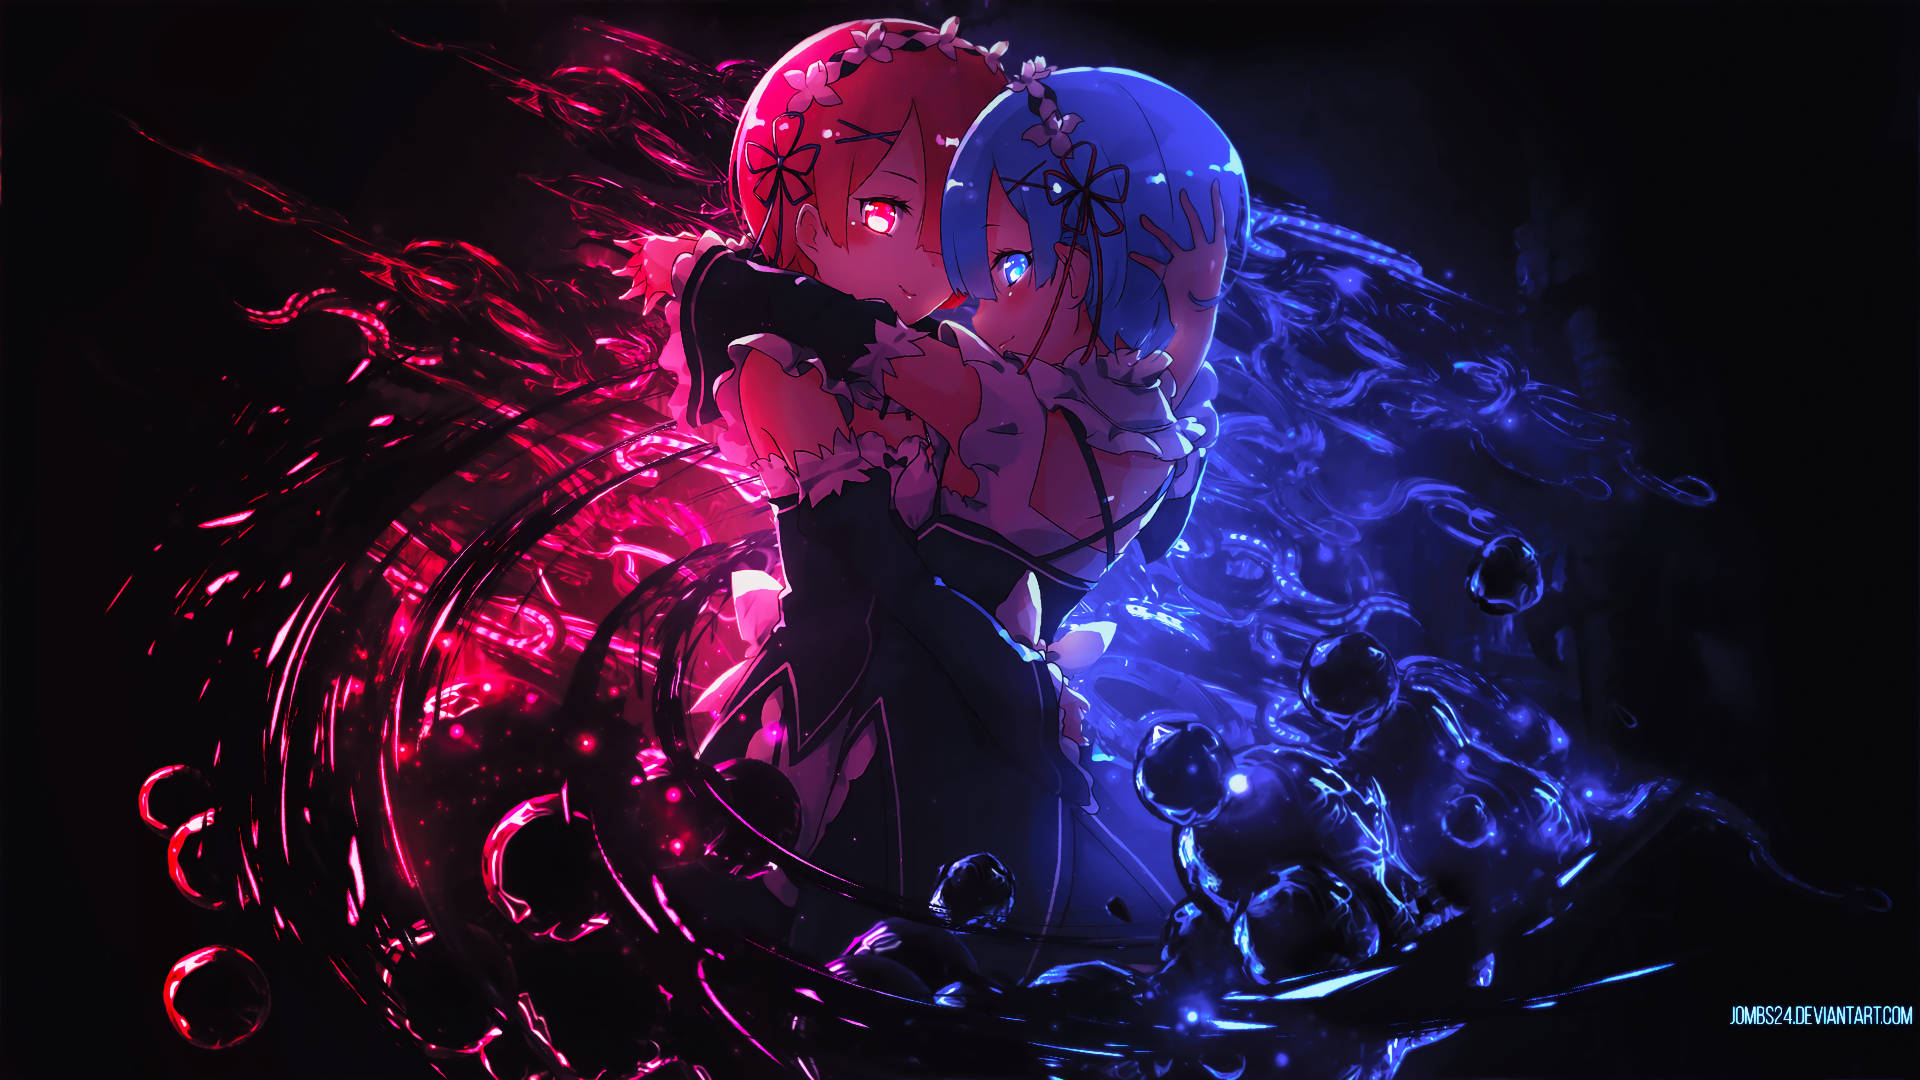 "Ram and Rem from Re:Zero - Starting Life in Another World" Wallpaper